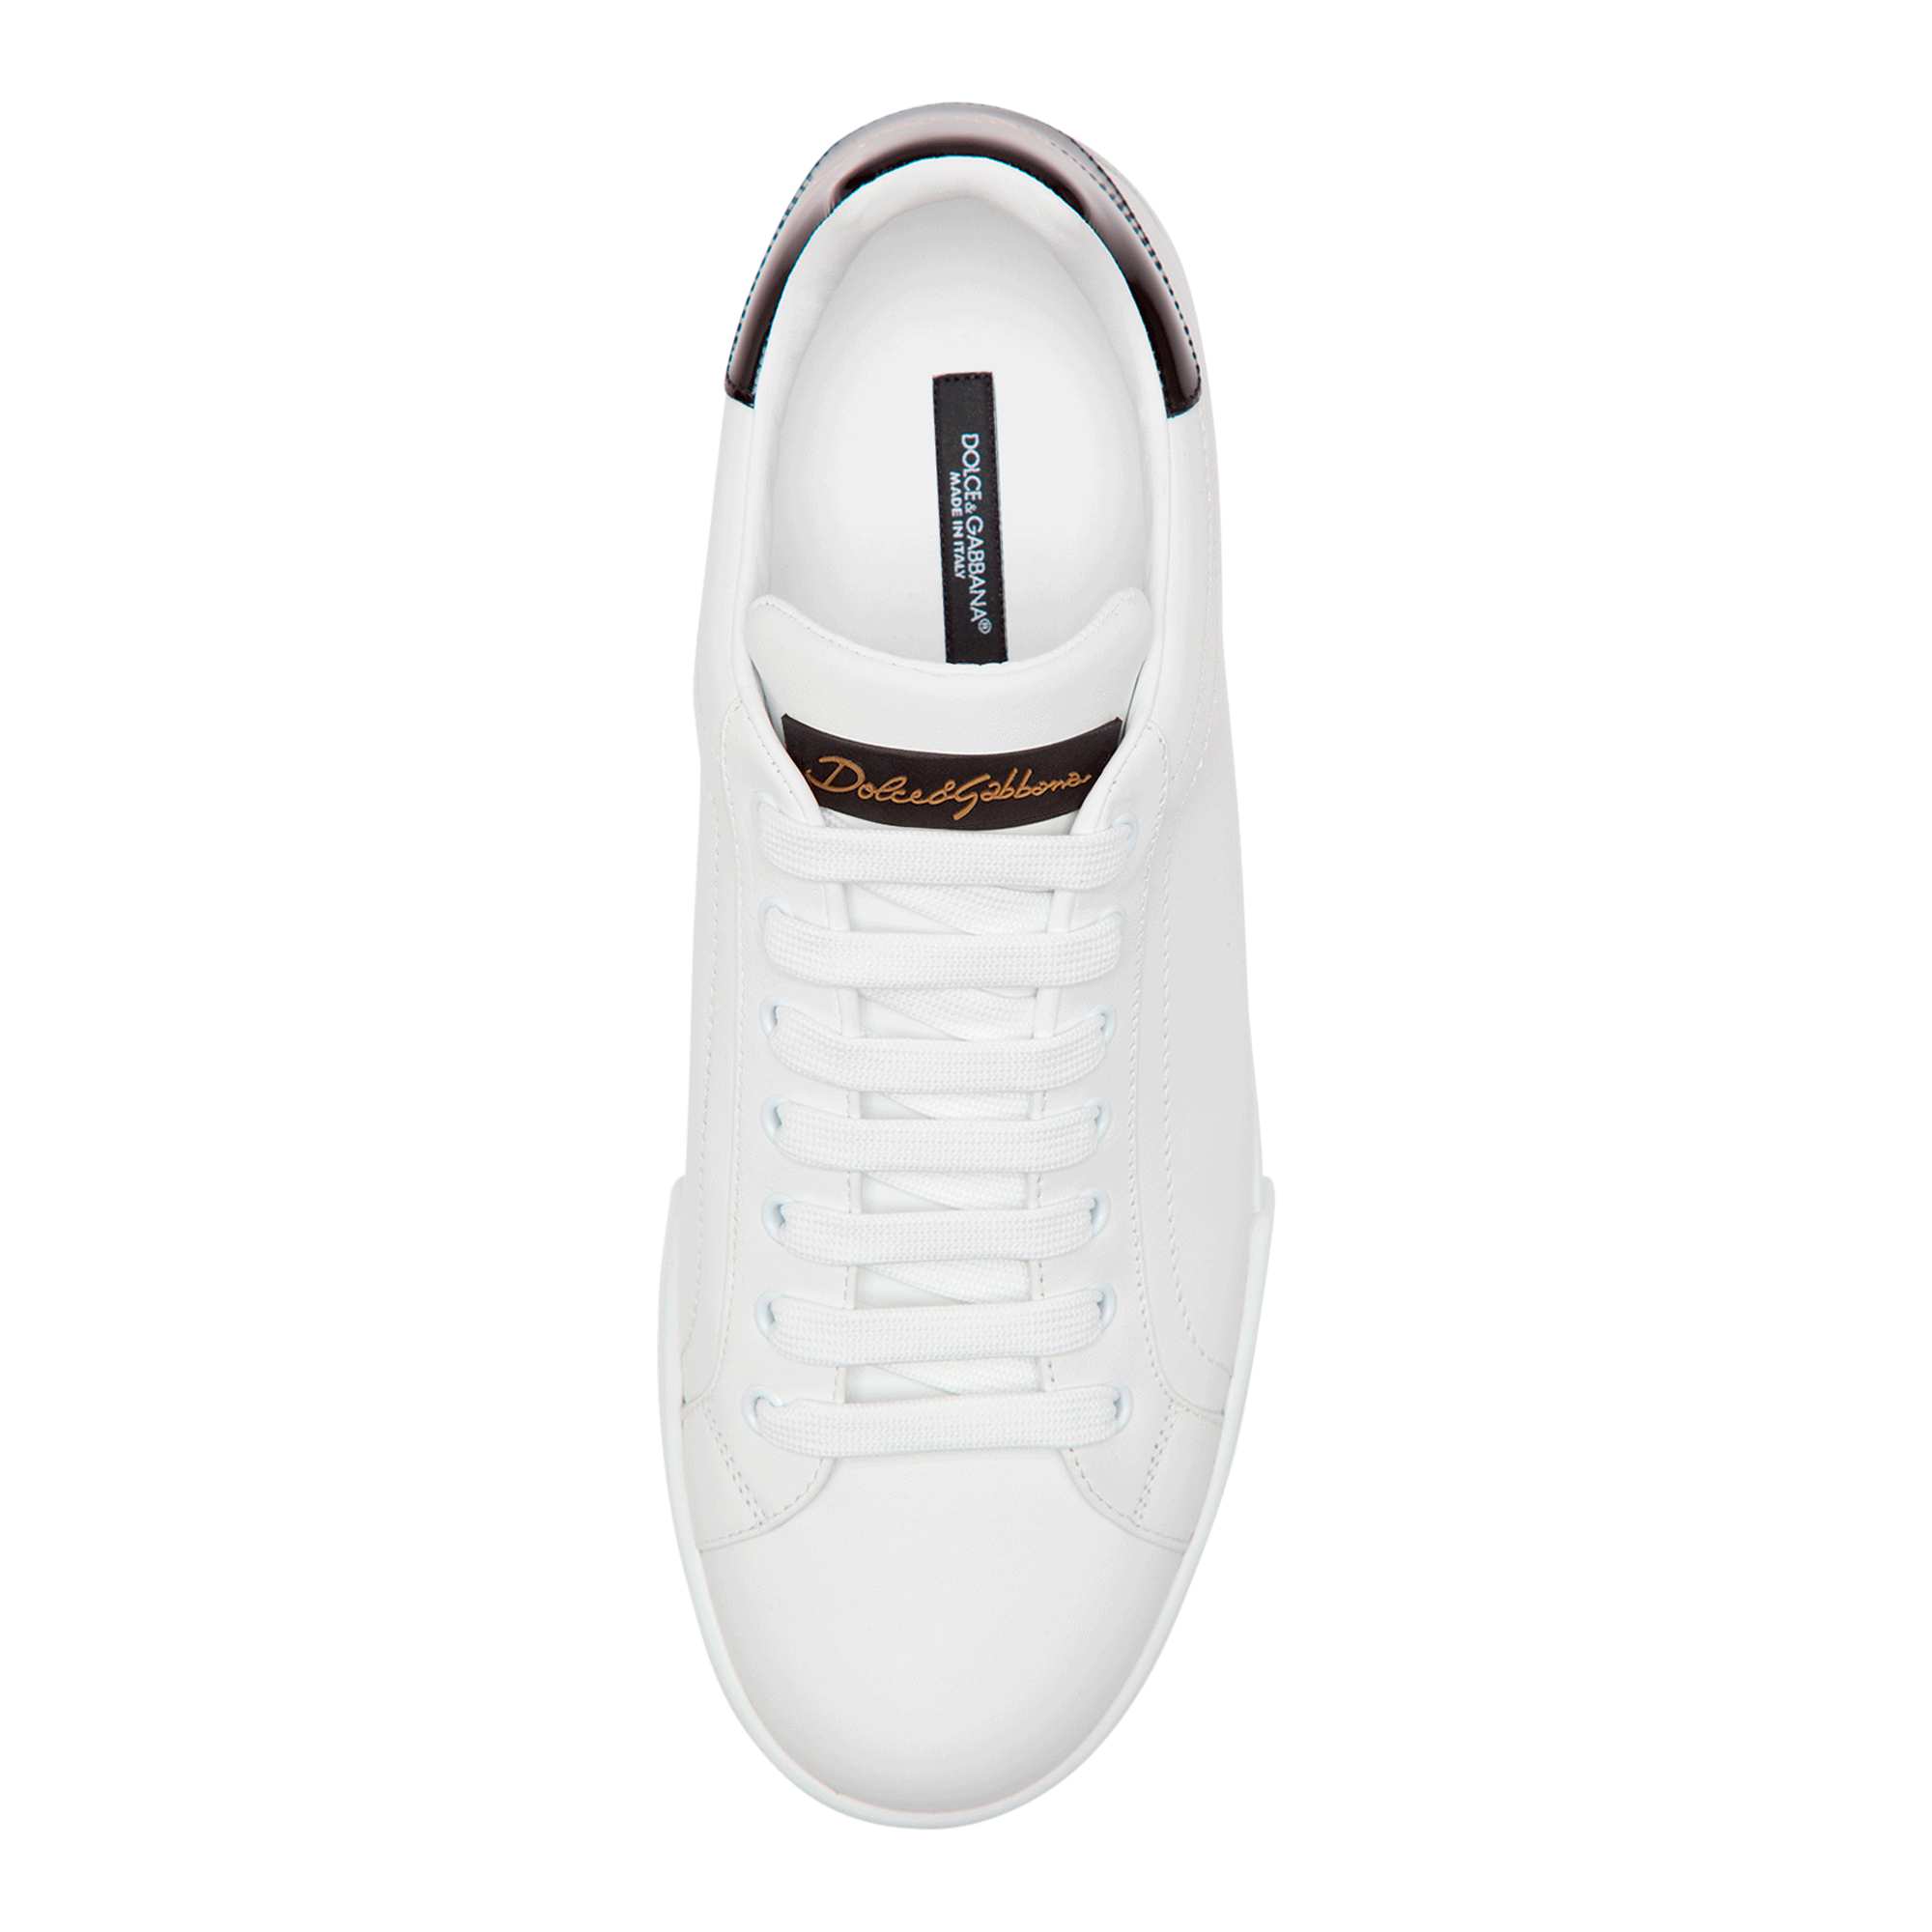 Dolce & Gabbana LEATHER SNEAKERS White 2